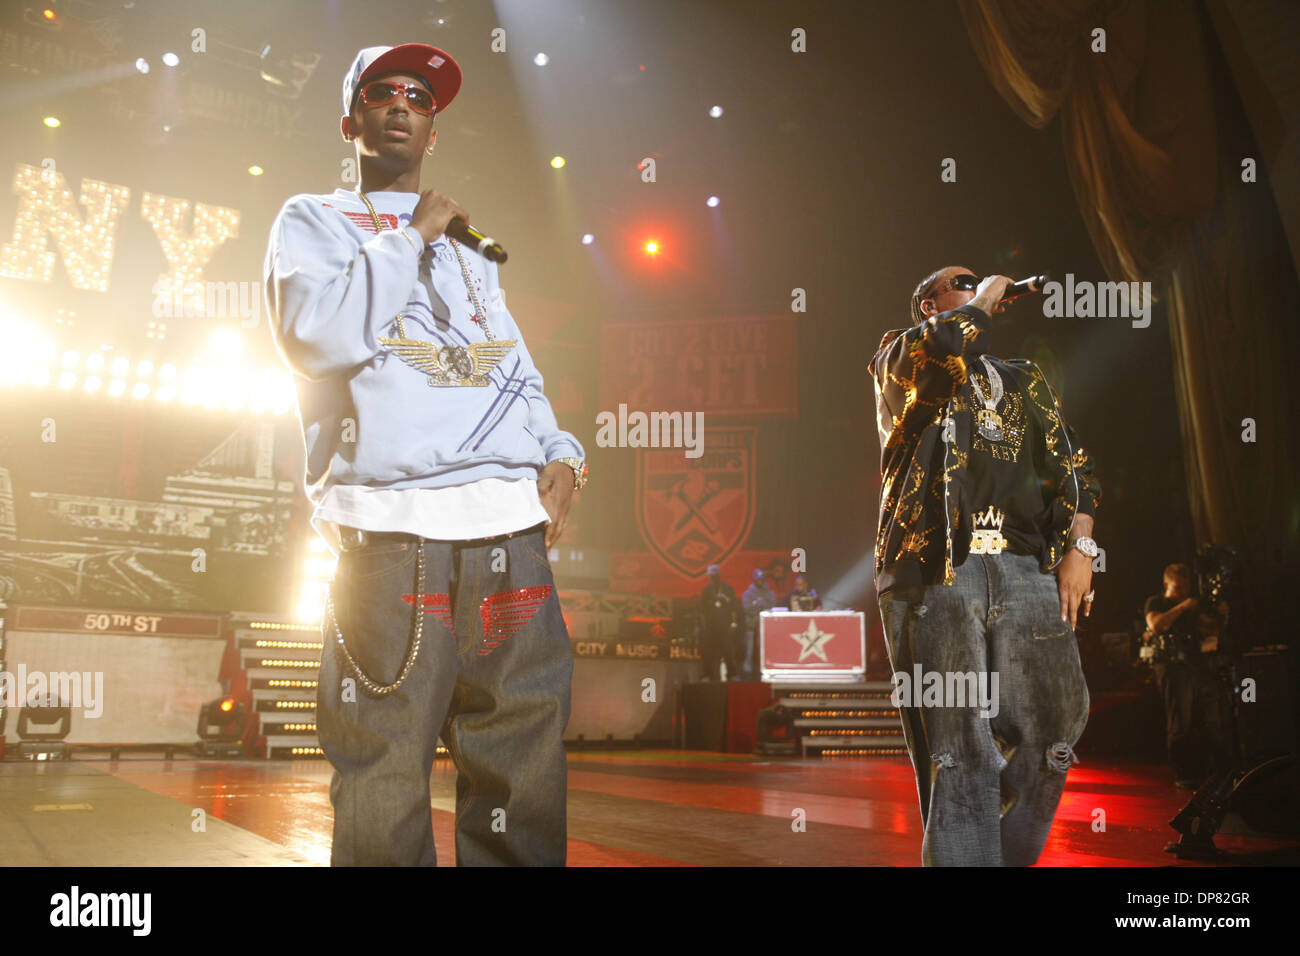 Sep 23, 2006 - New York, NY, USA - DON OMAR and FABOLOUS (in hat) performing at Boost Mobile Rockcorps Give to Get concert for volunteers at Radio City Music Hall. Stock Photo